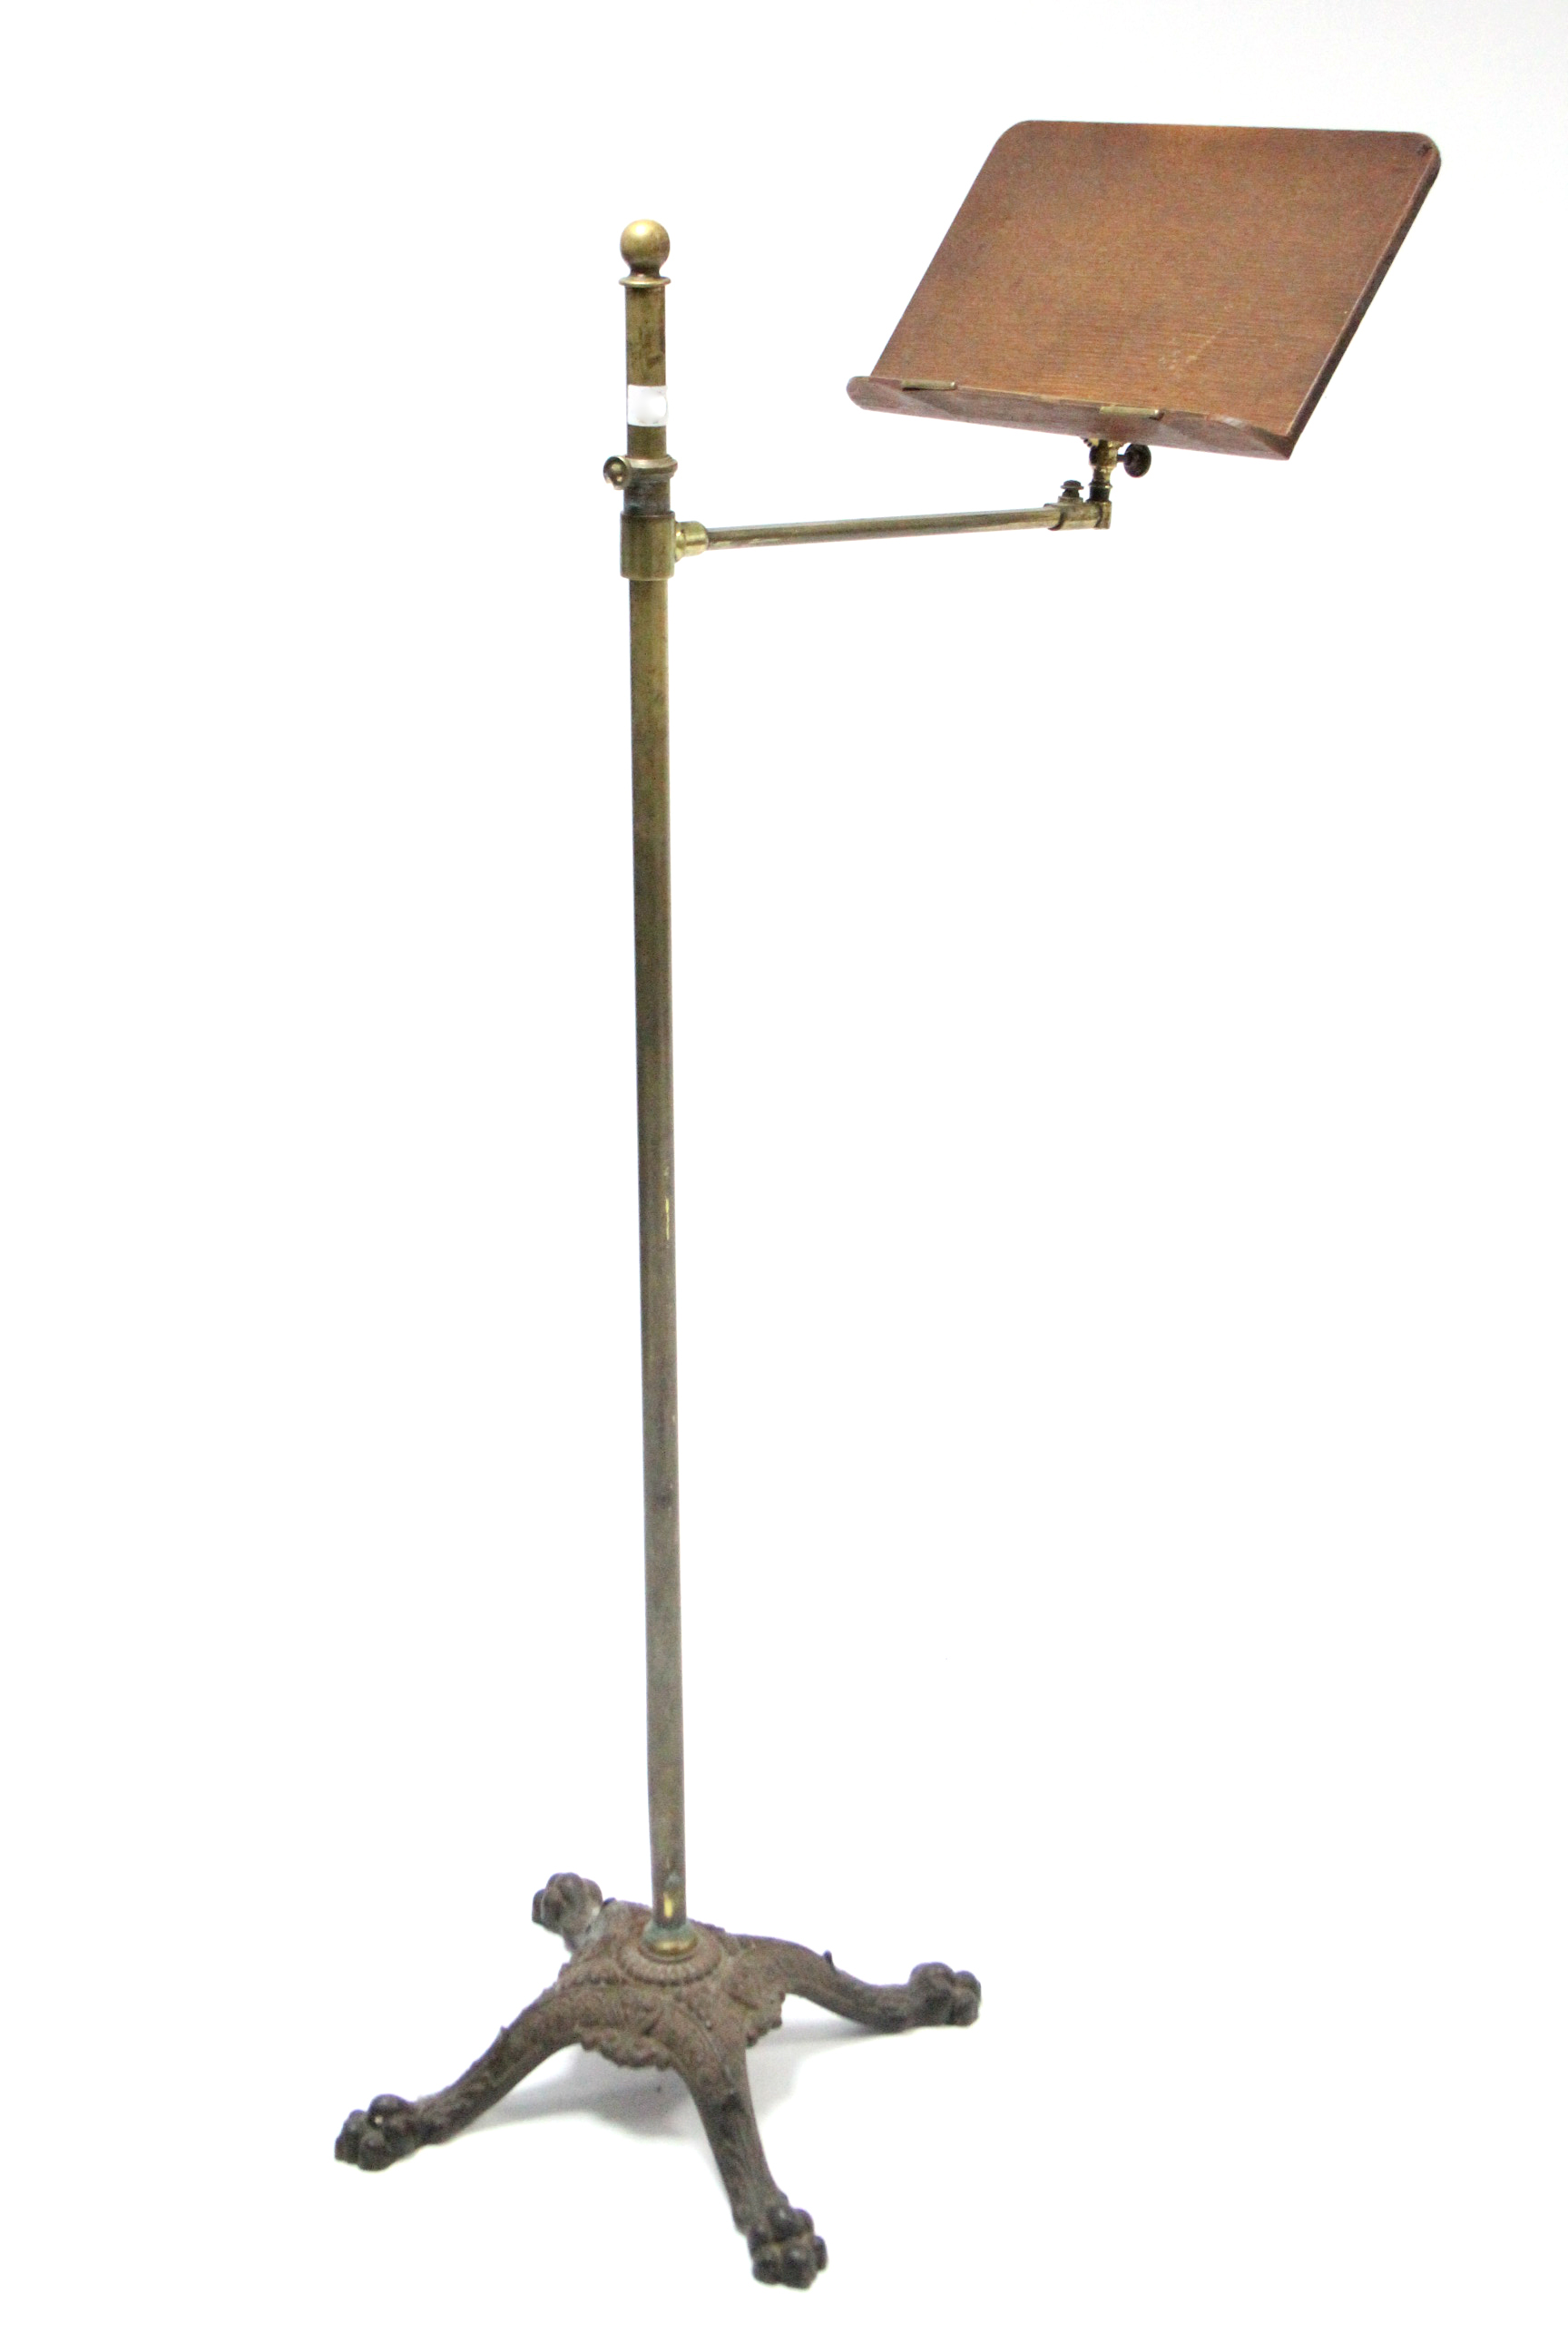 An Edwardian brass & oak adjustable reading stand on cast-iron base with four shaped legs.